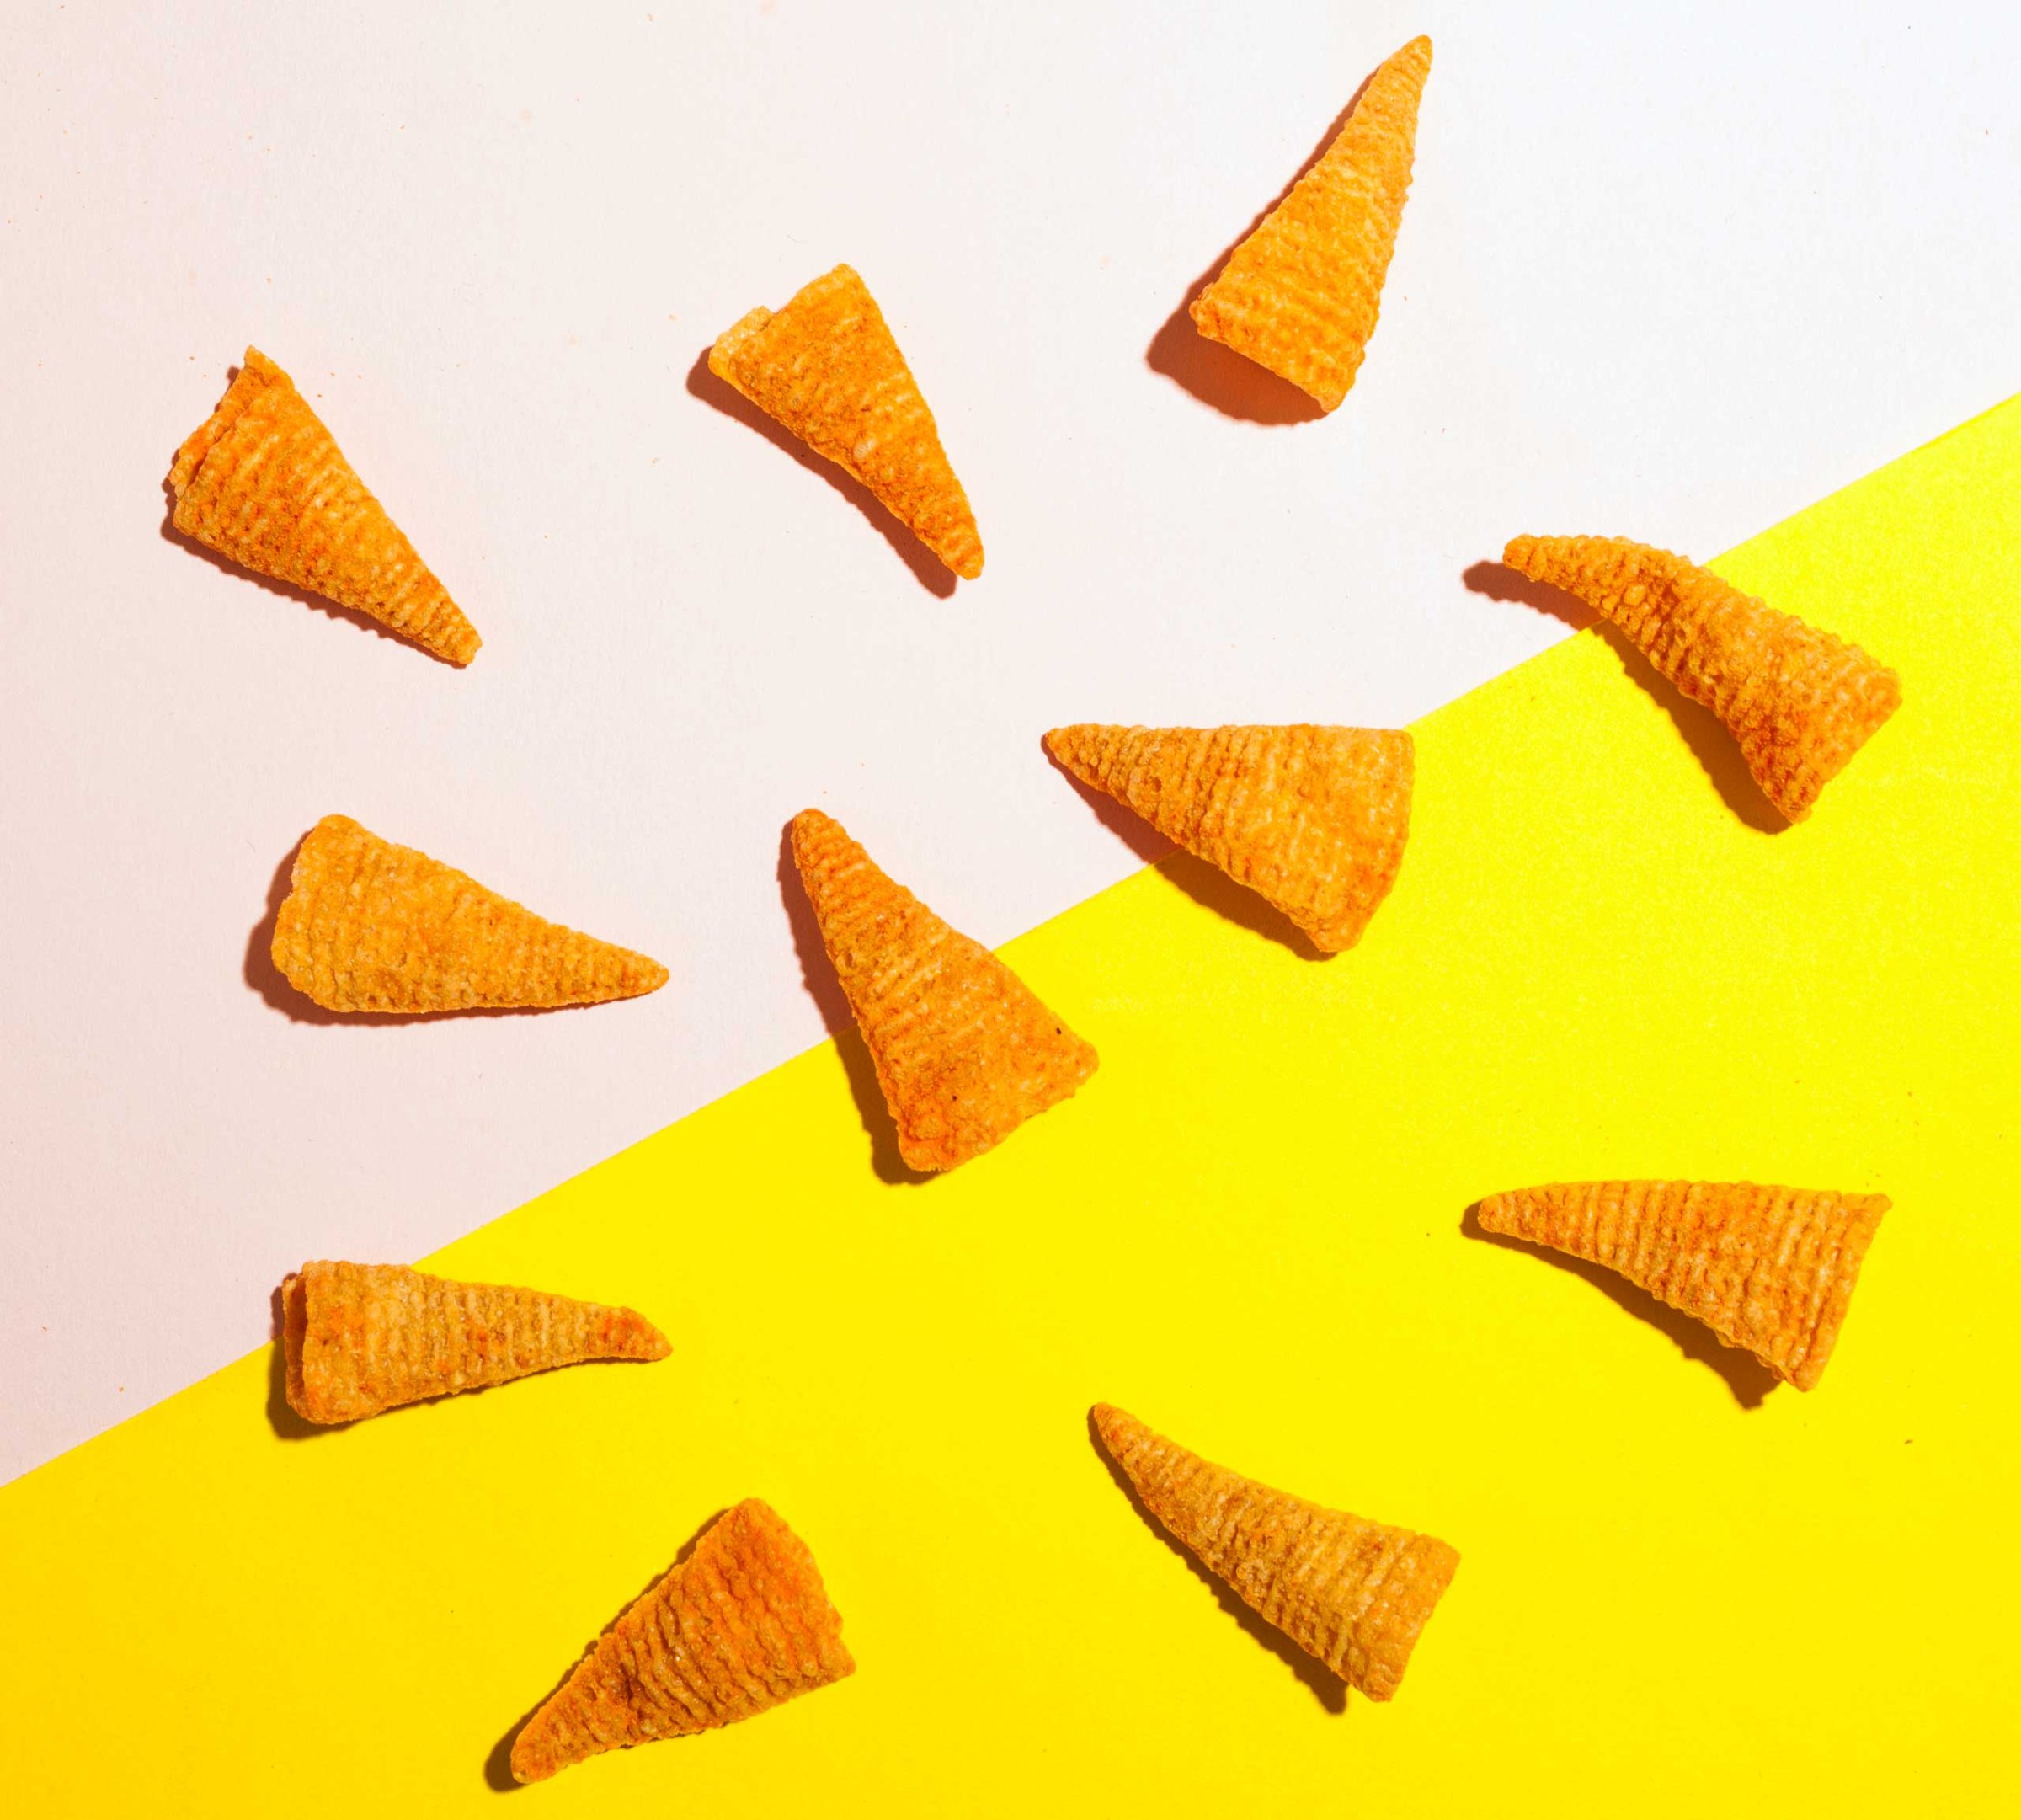 TIME.com stock photos Food Snacks Chips Bugles